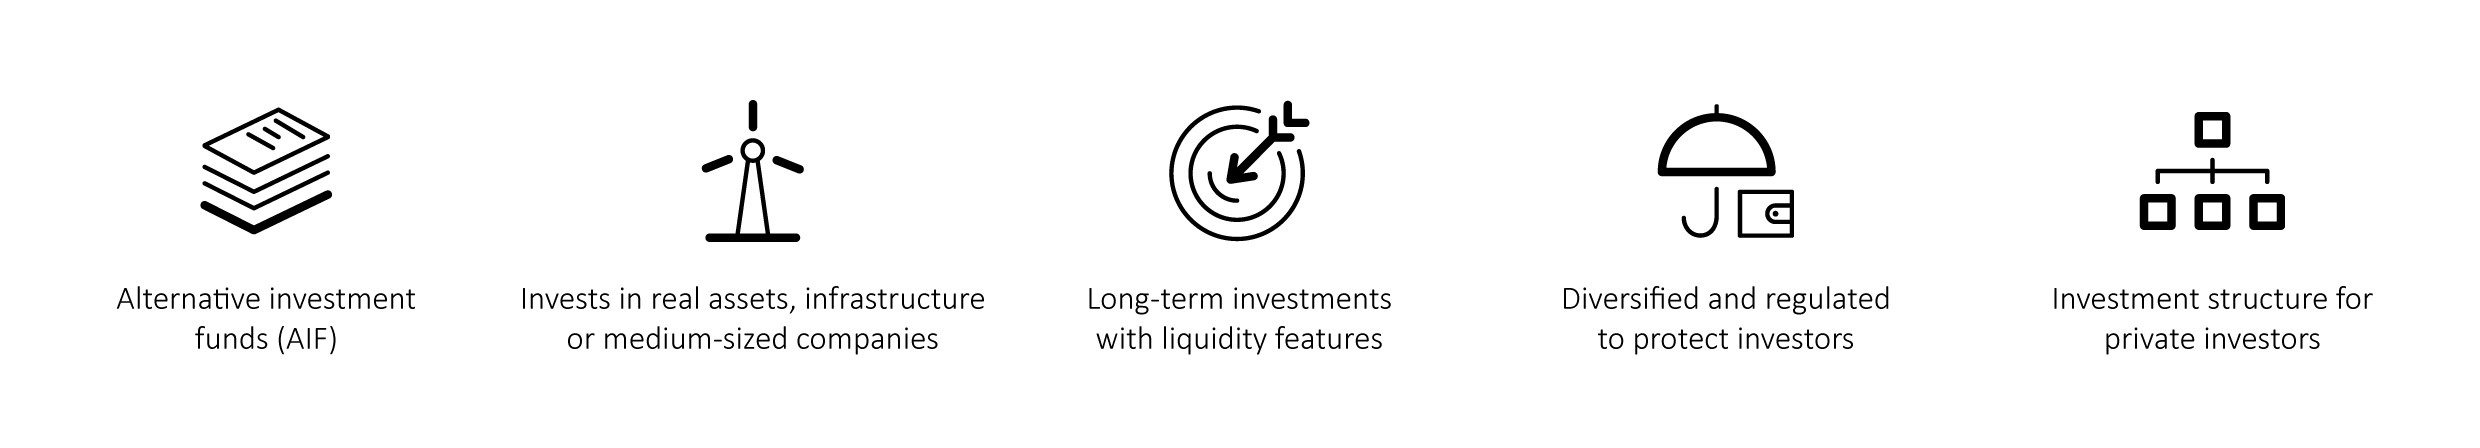 Answer to the question of what is a European Long-Term Investment Fund by listing five attributes